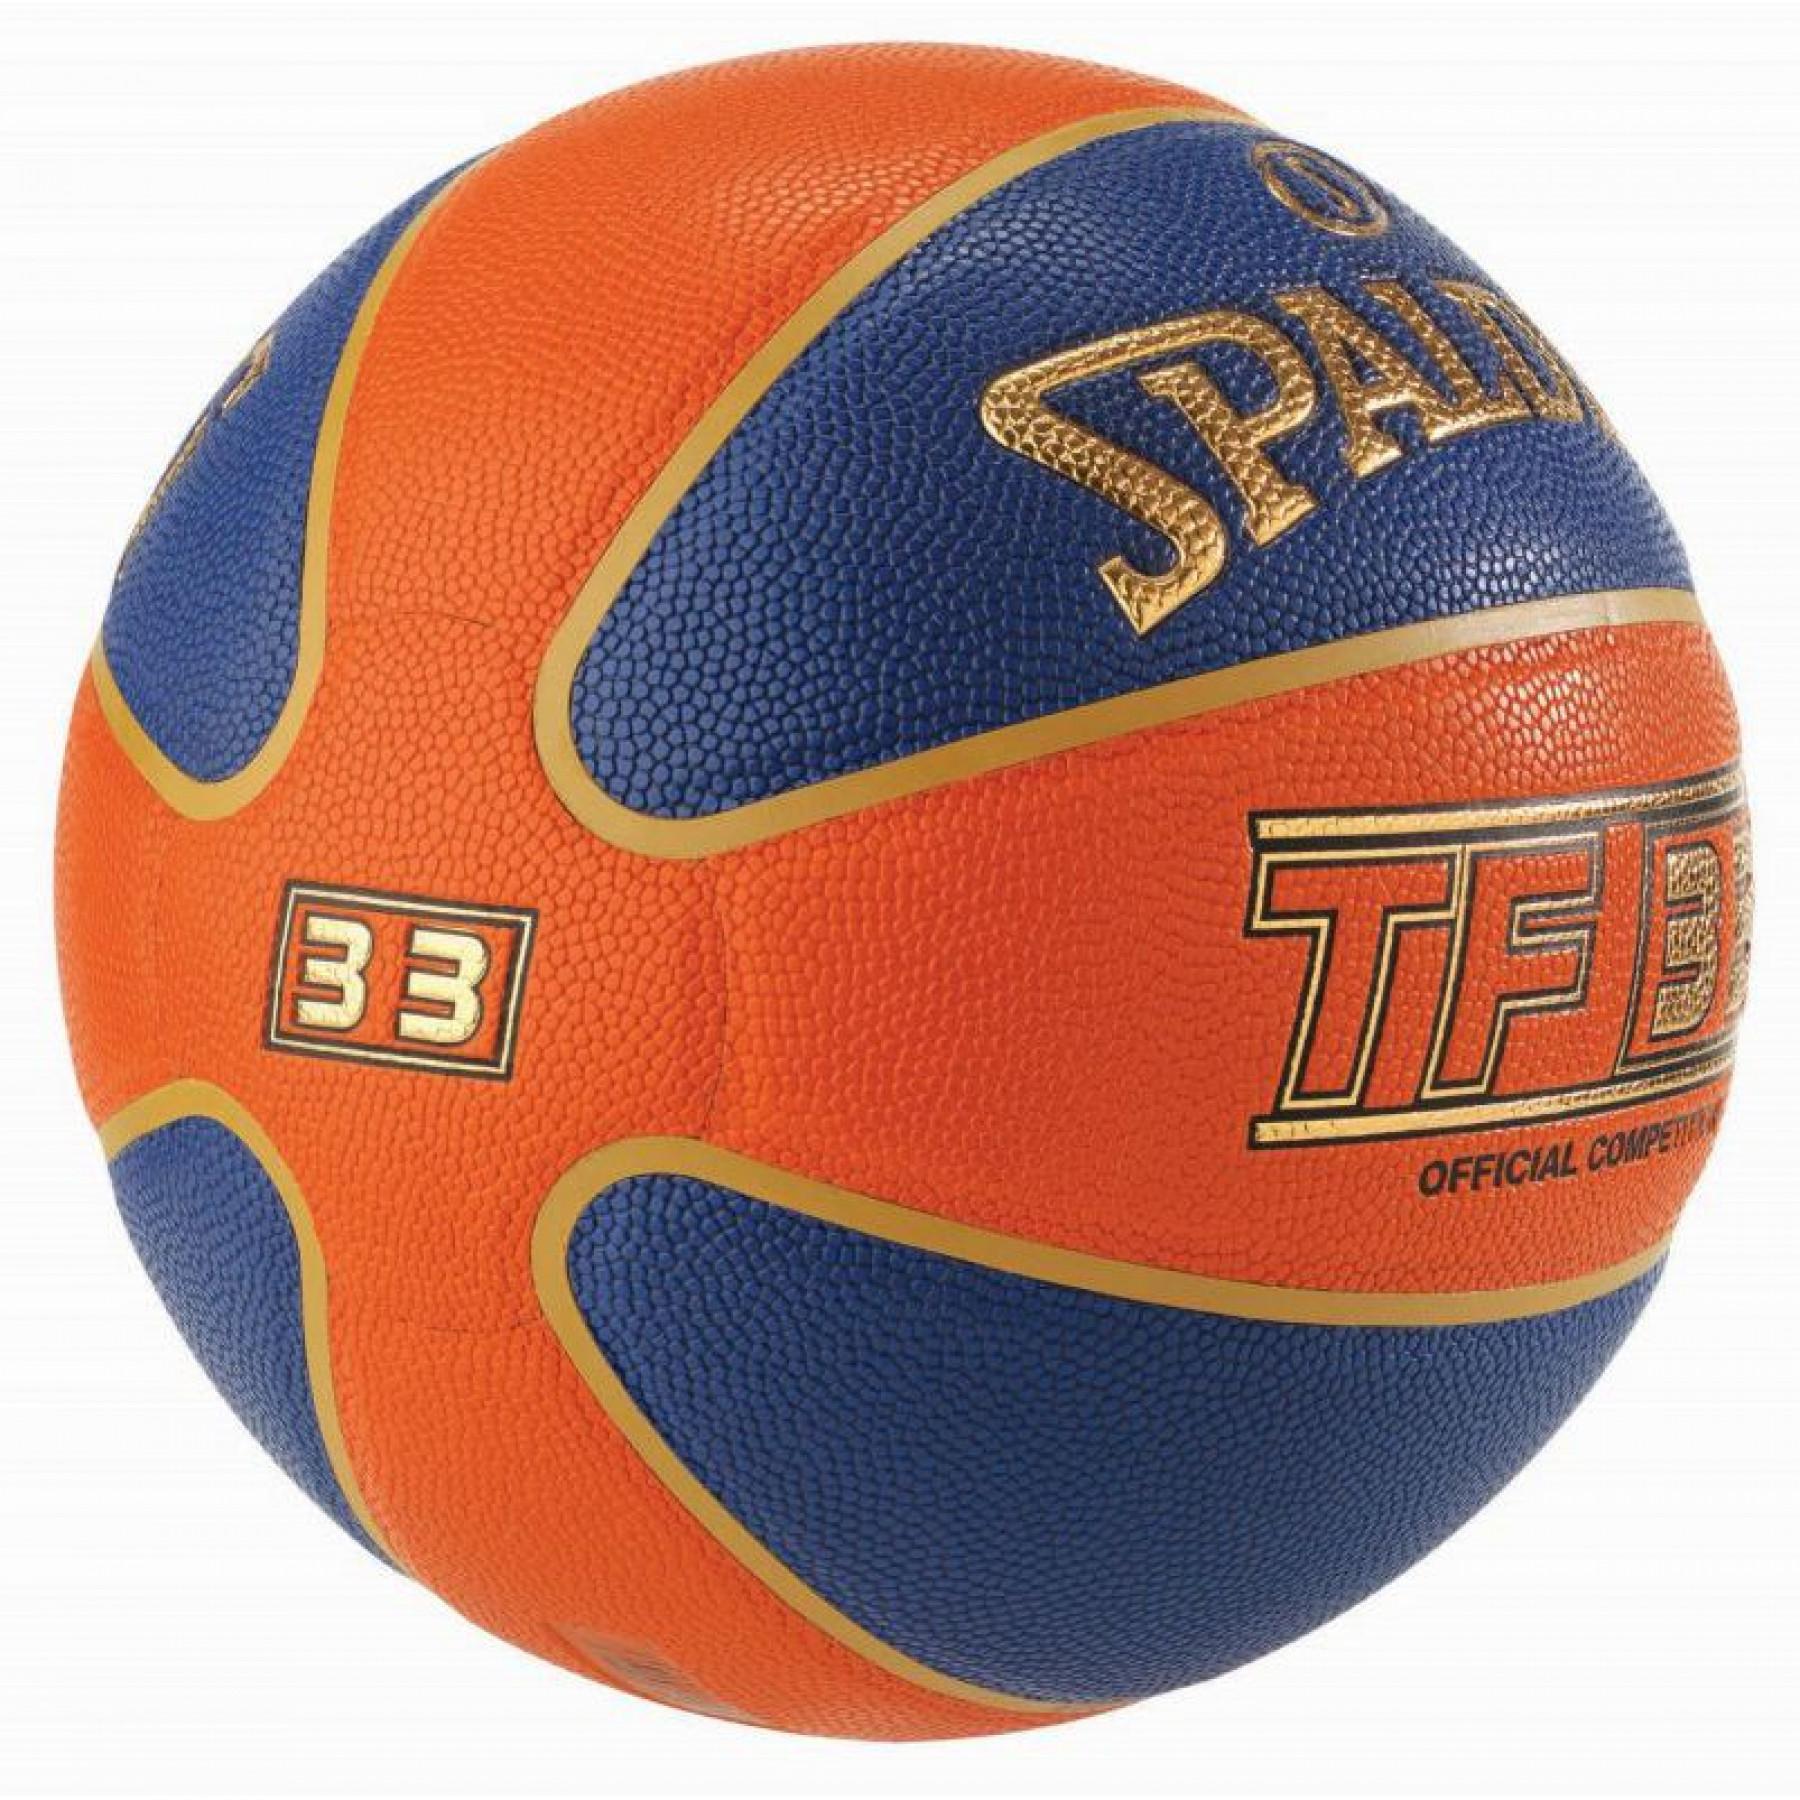 Balão Spalding TF 33 In/Out